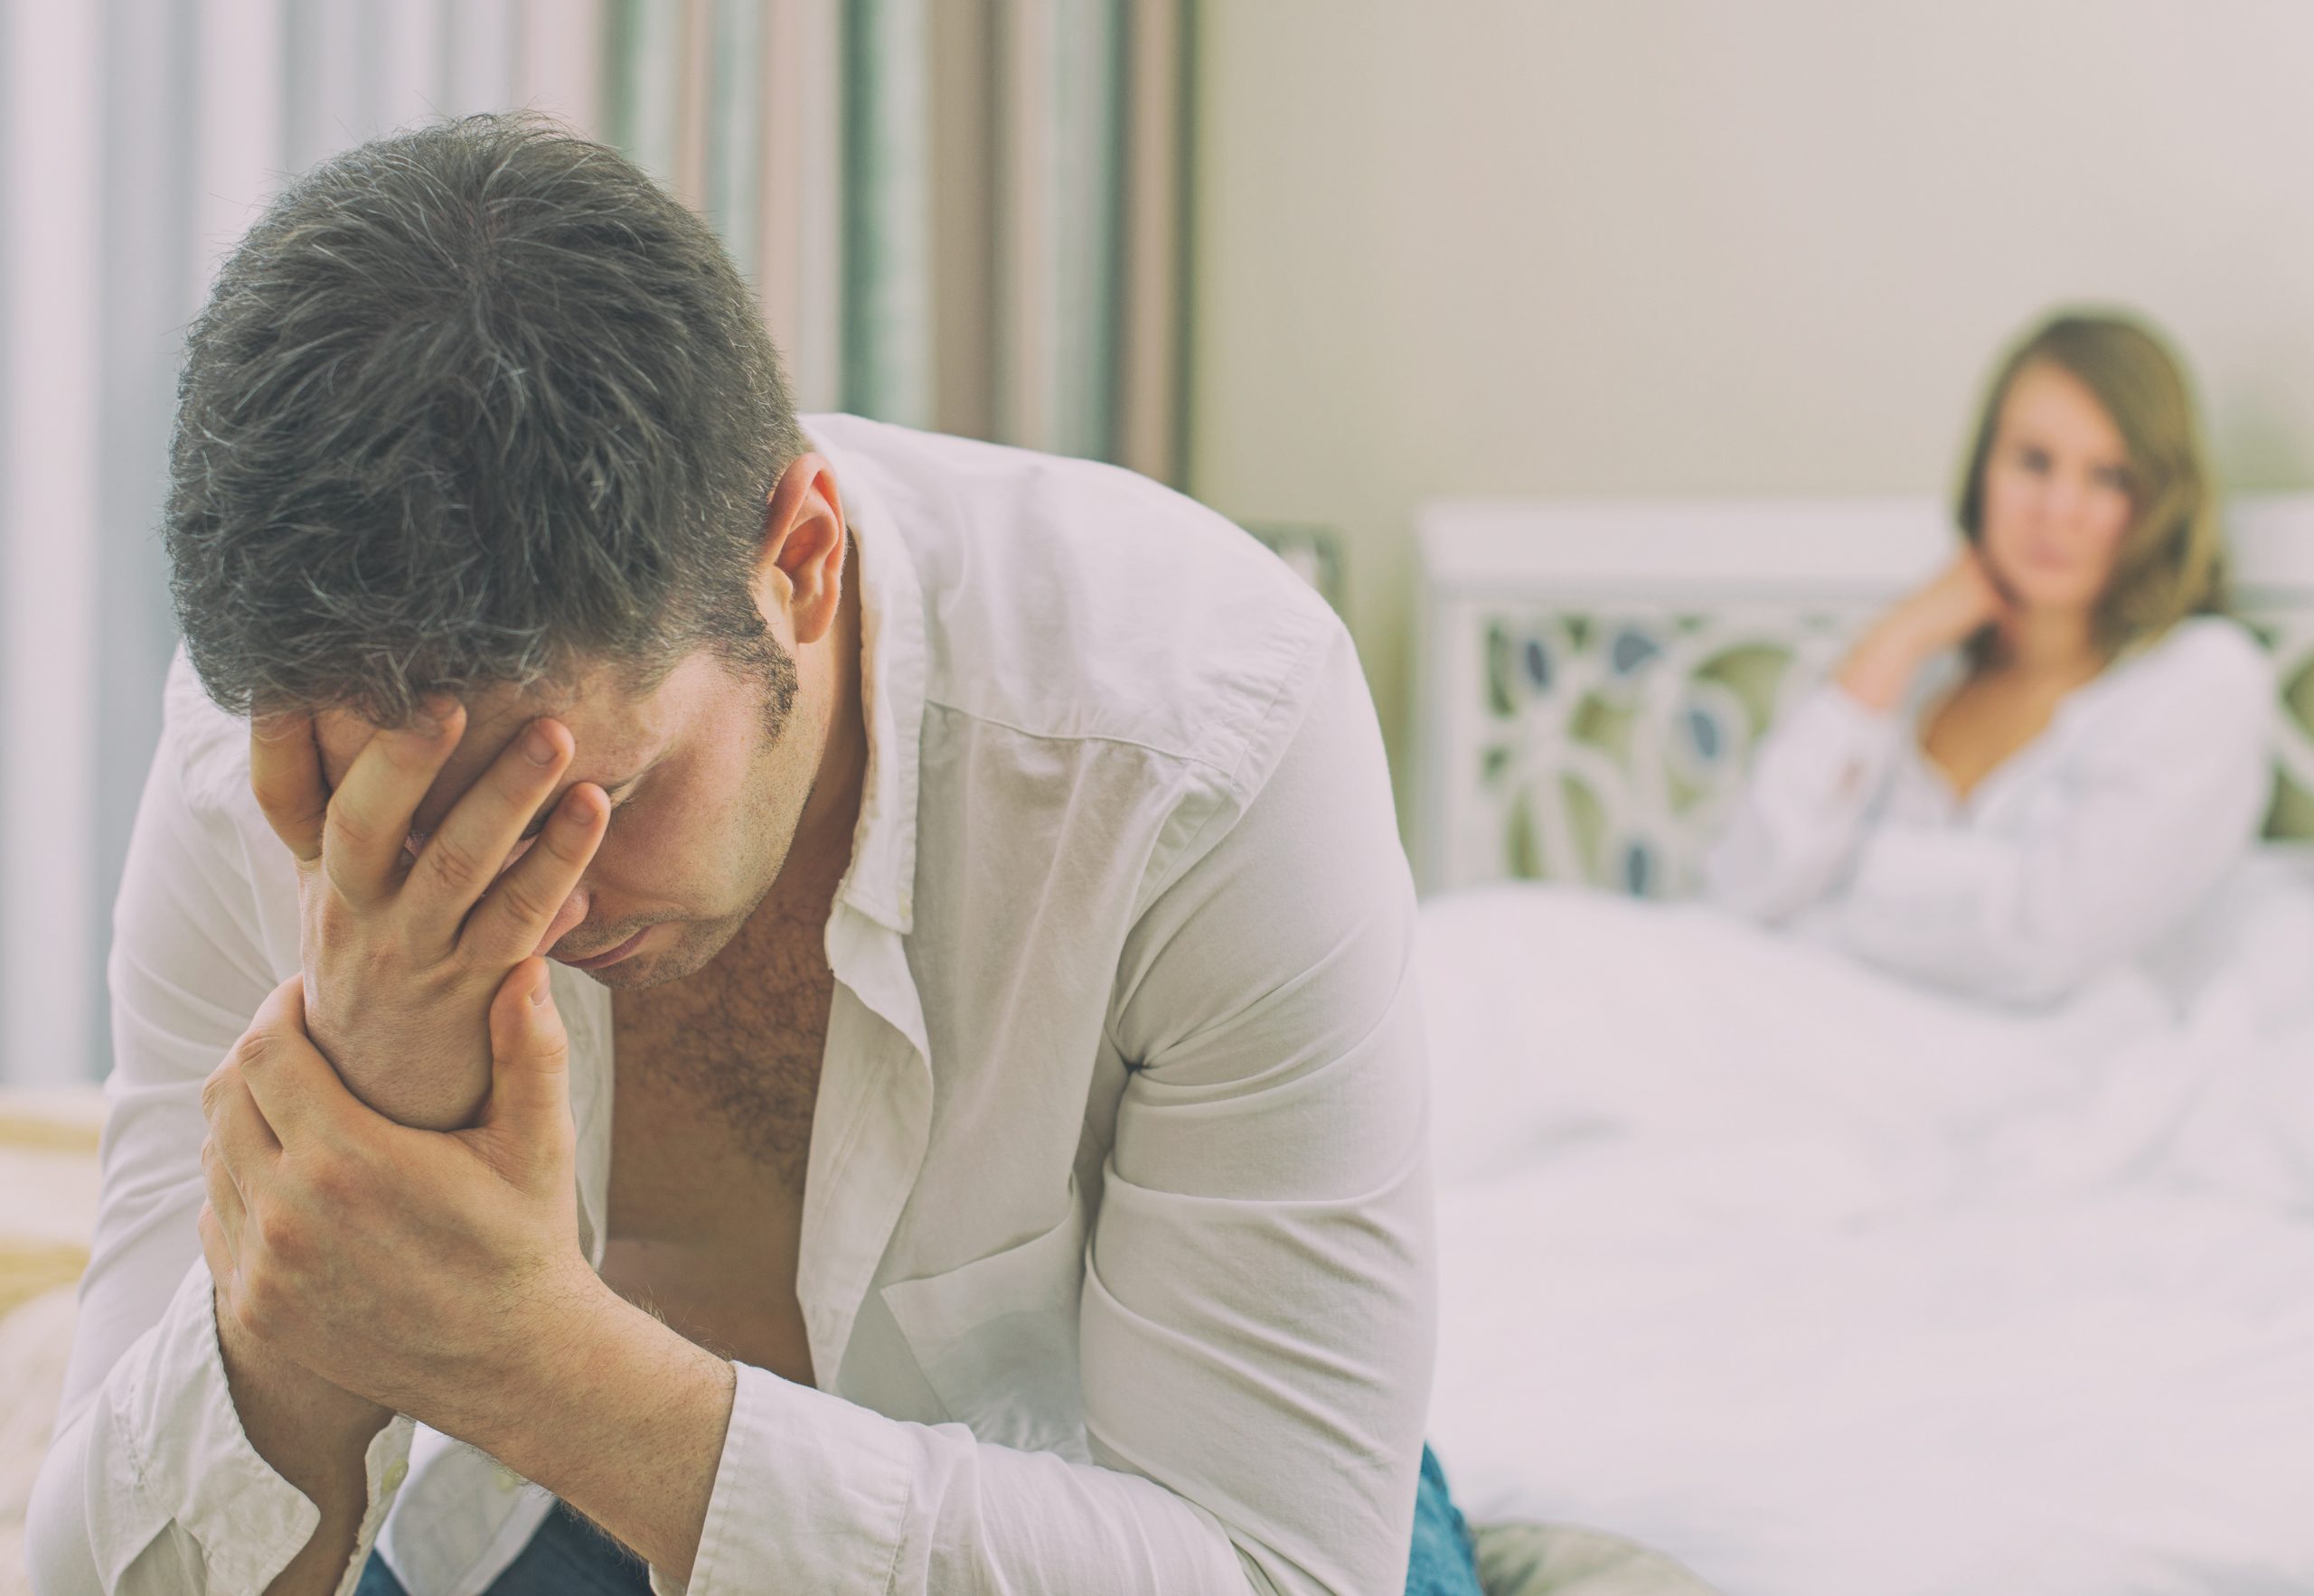 Urologic conditions lead to depression, sleep issues in men –